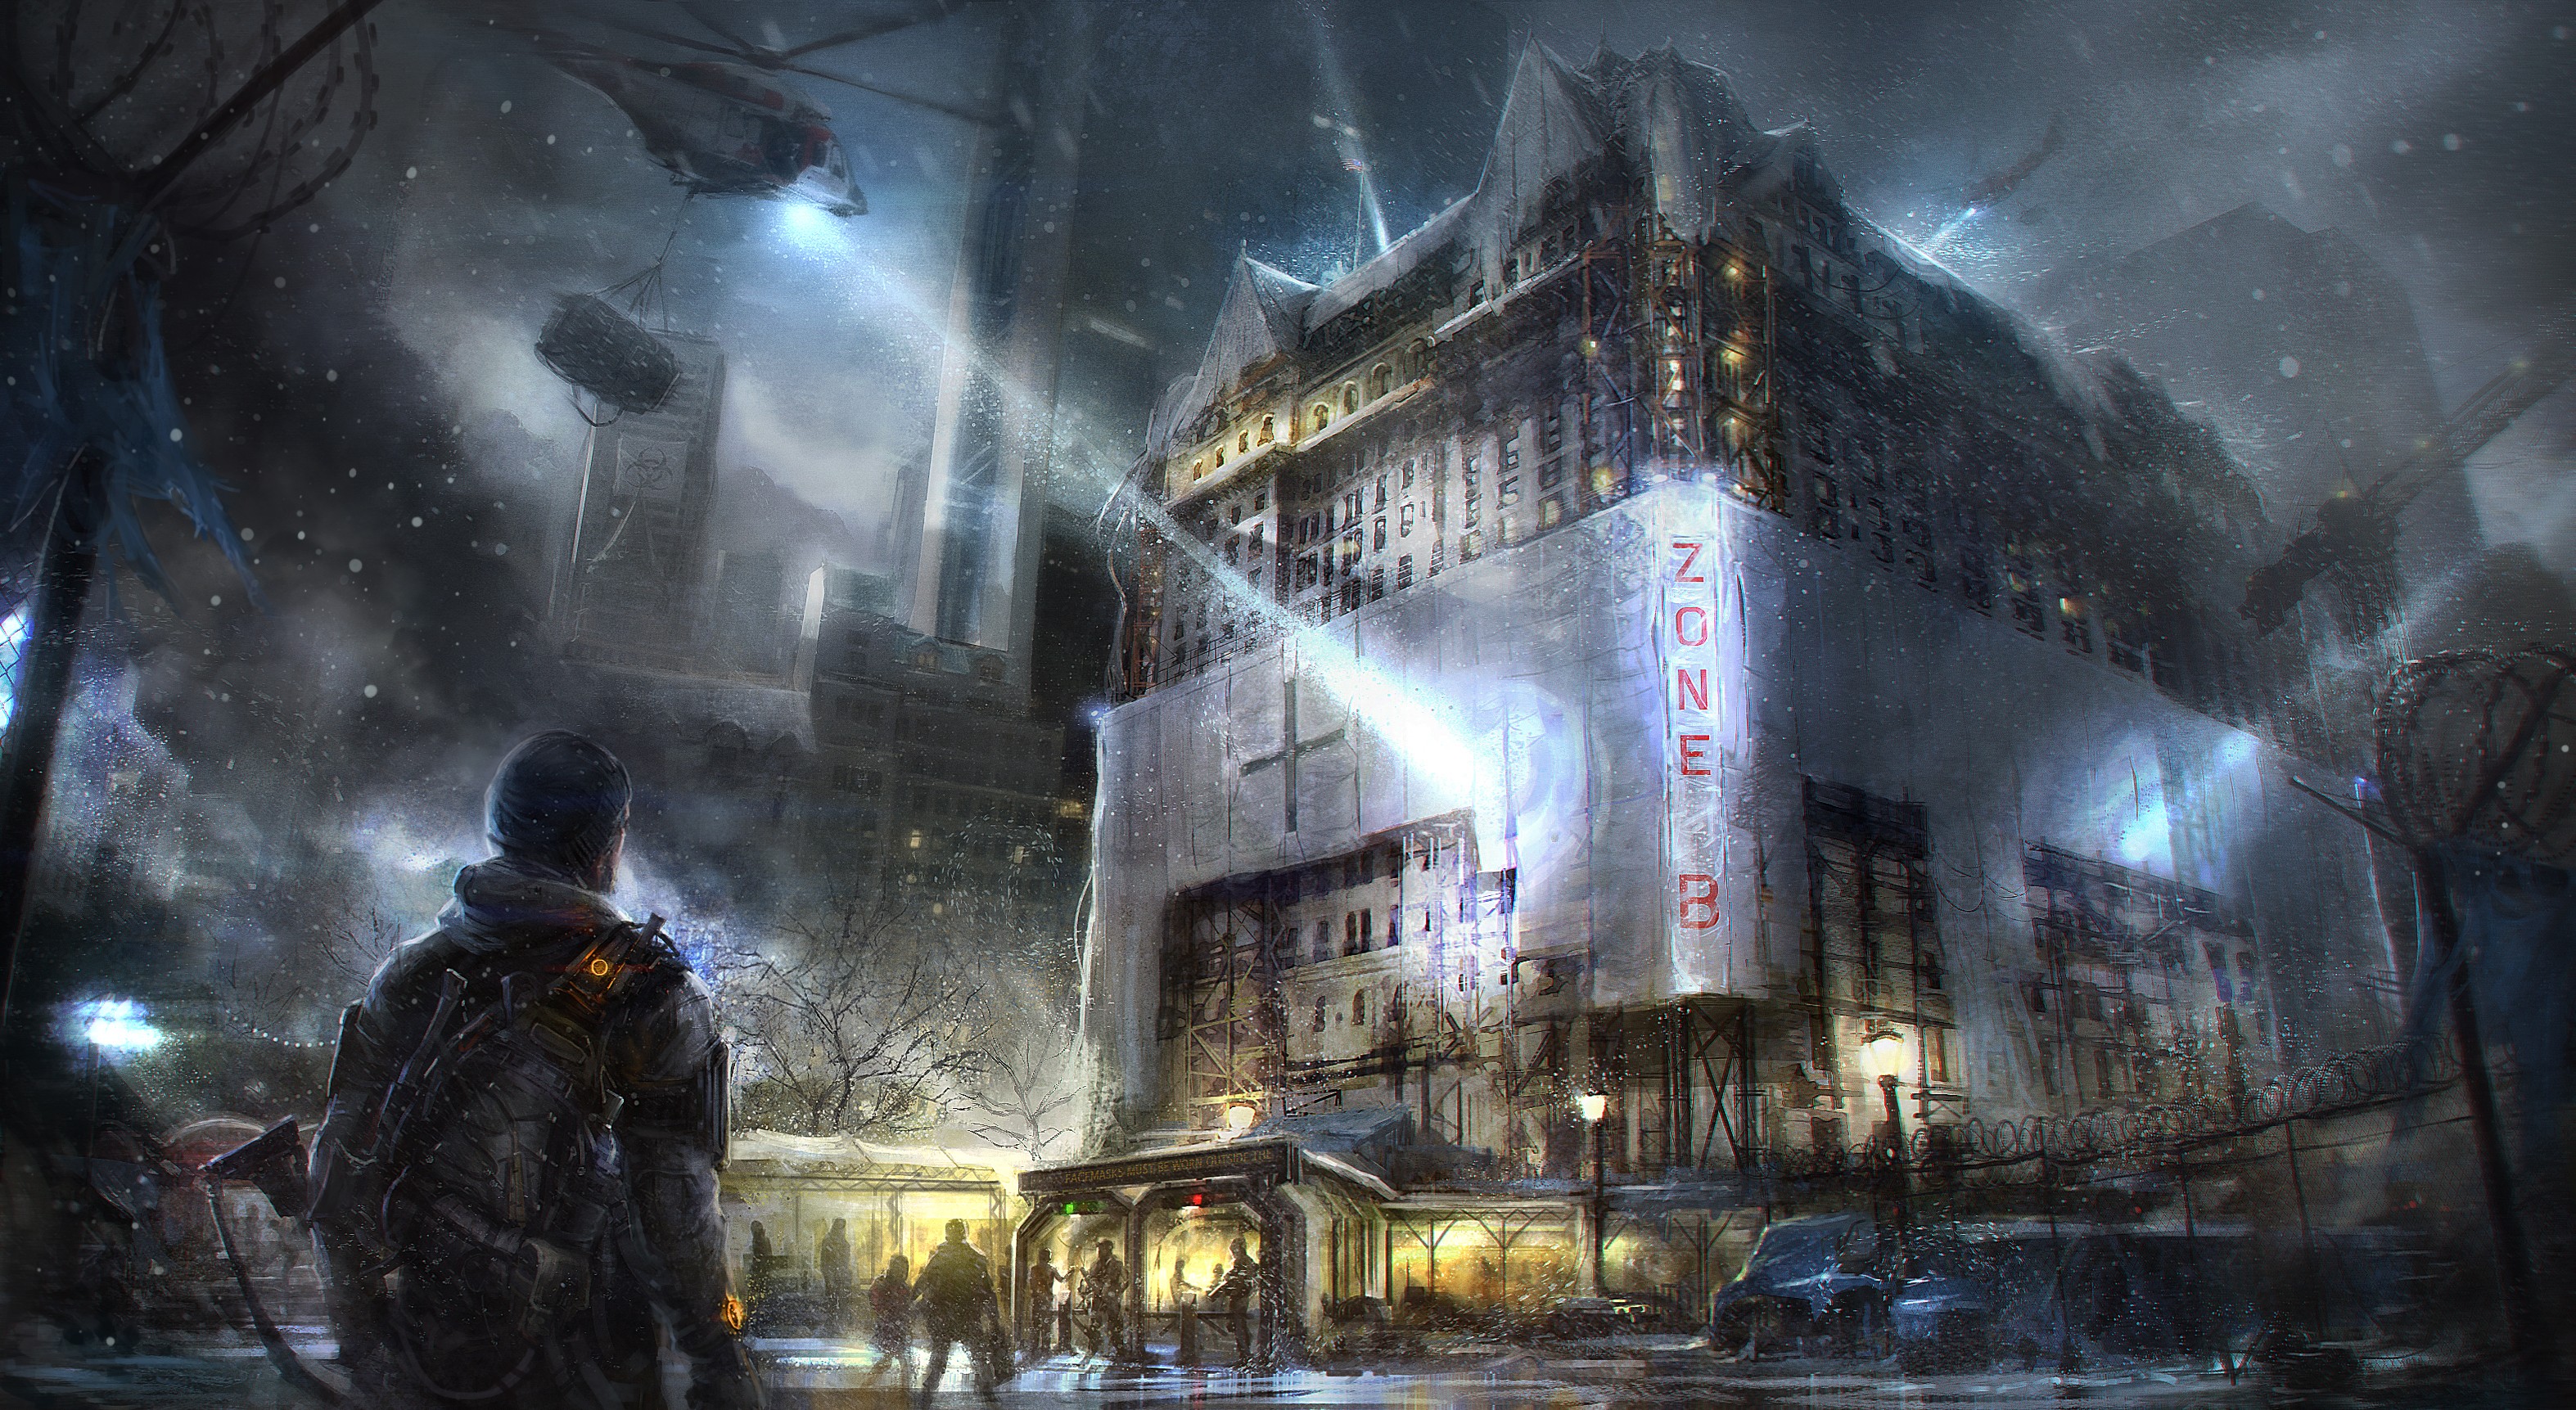 General 3147x1723 Tom Clancy's The Division video games video game art apocalyptic futuristic PC gaming